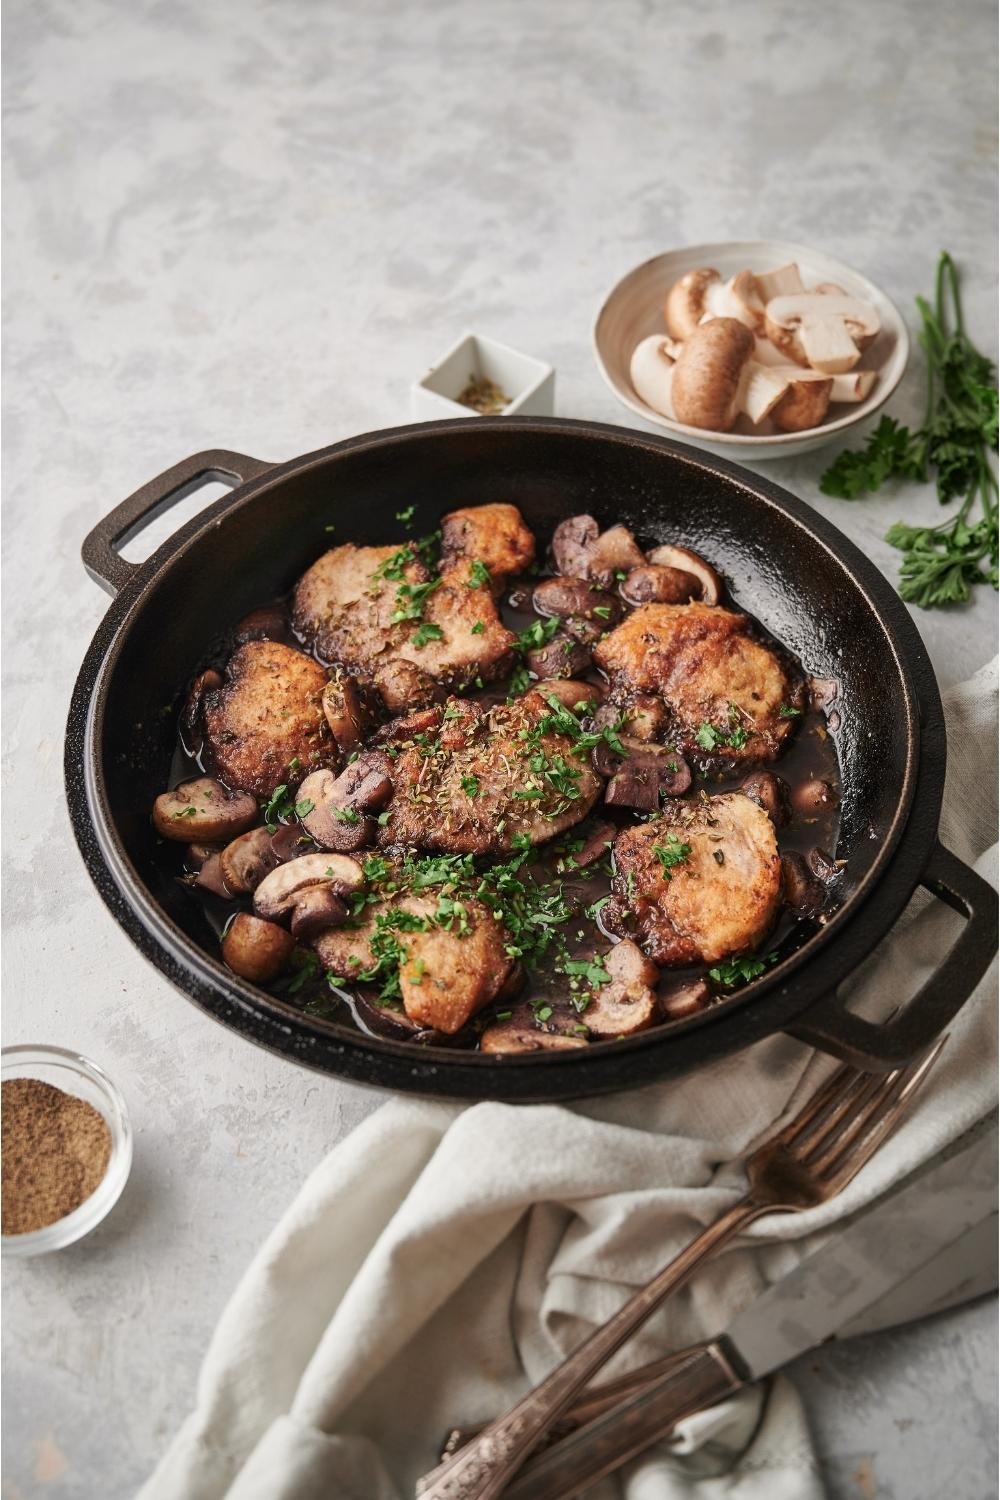 Cooked chicken marsala in a cast iron pan with a napkin, fork, knife, parsley sprigs, a bowl of raw mushrooms, and oregano all surrounding the pan on a grey counter.